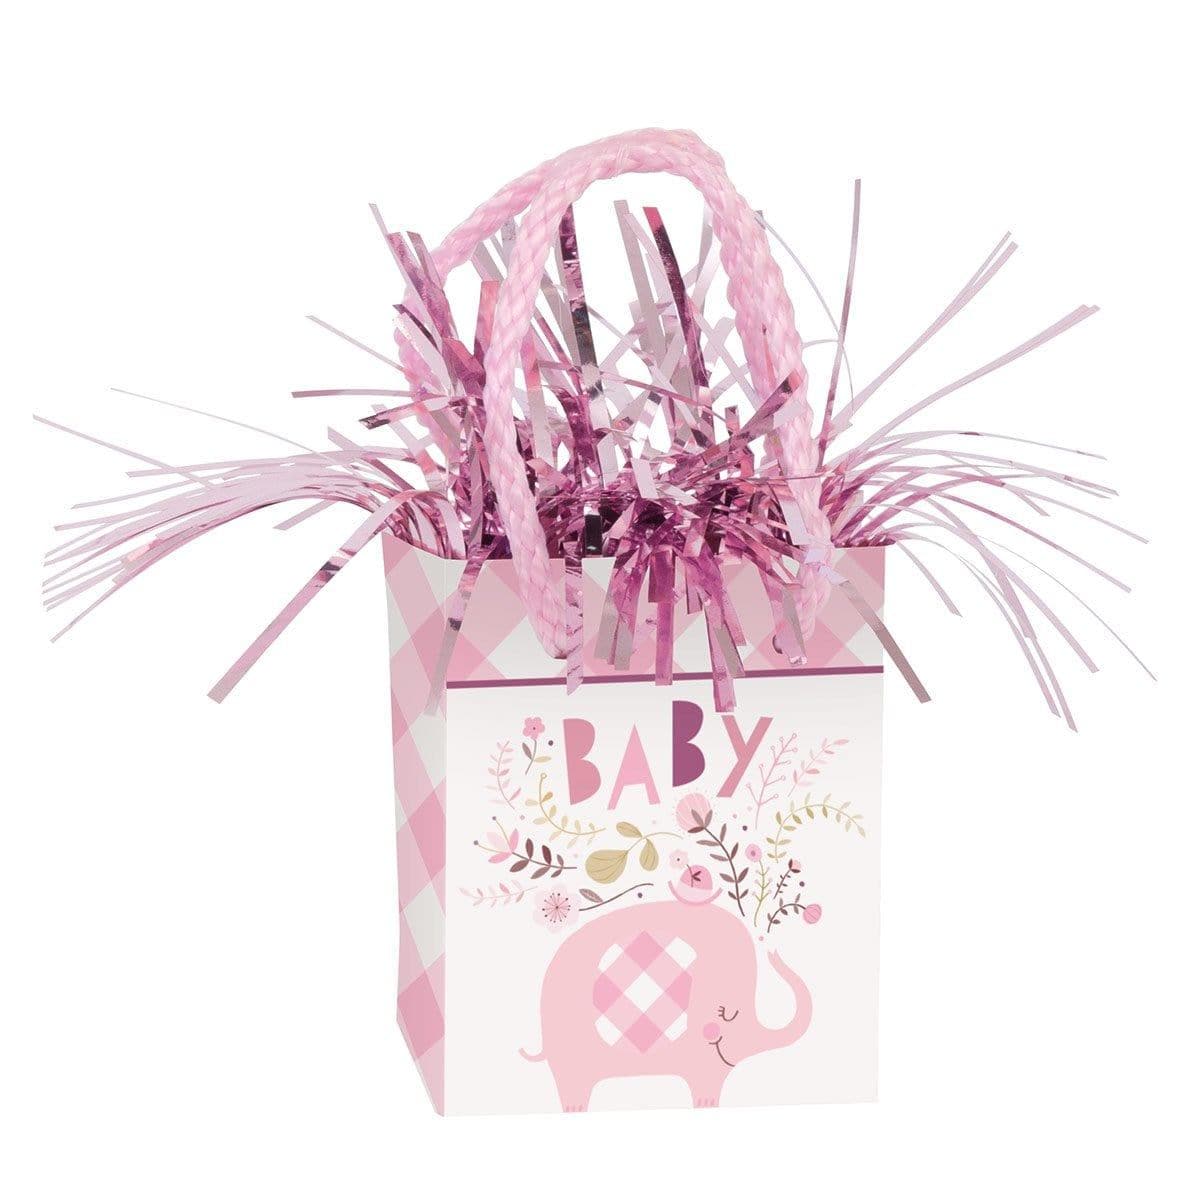 Buy Baby Shower Pink Floral Elephant Balloon Weight sold at Party Expert